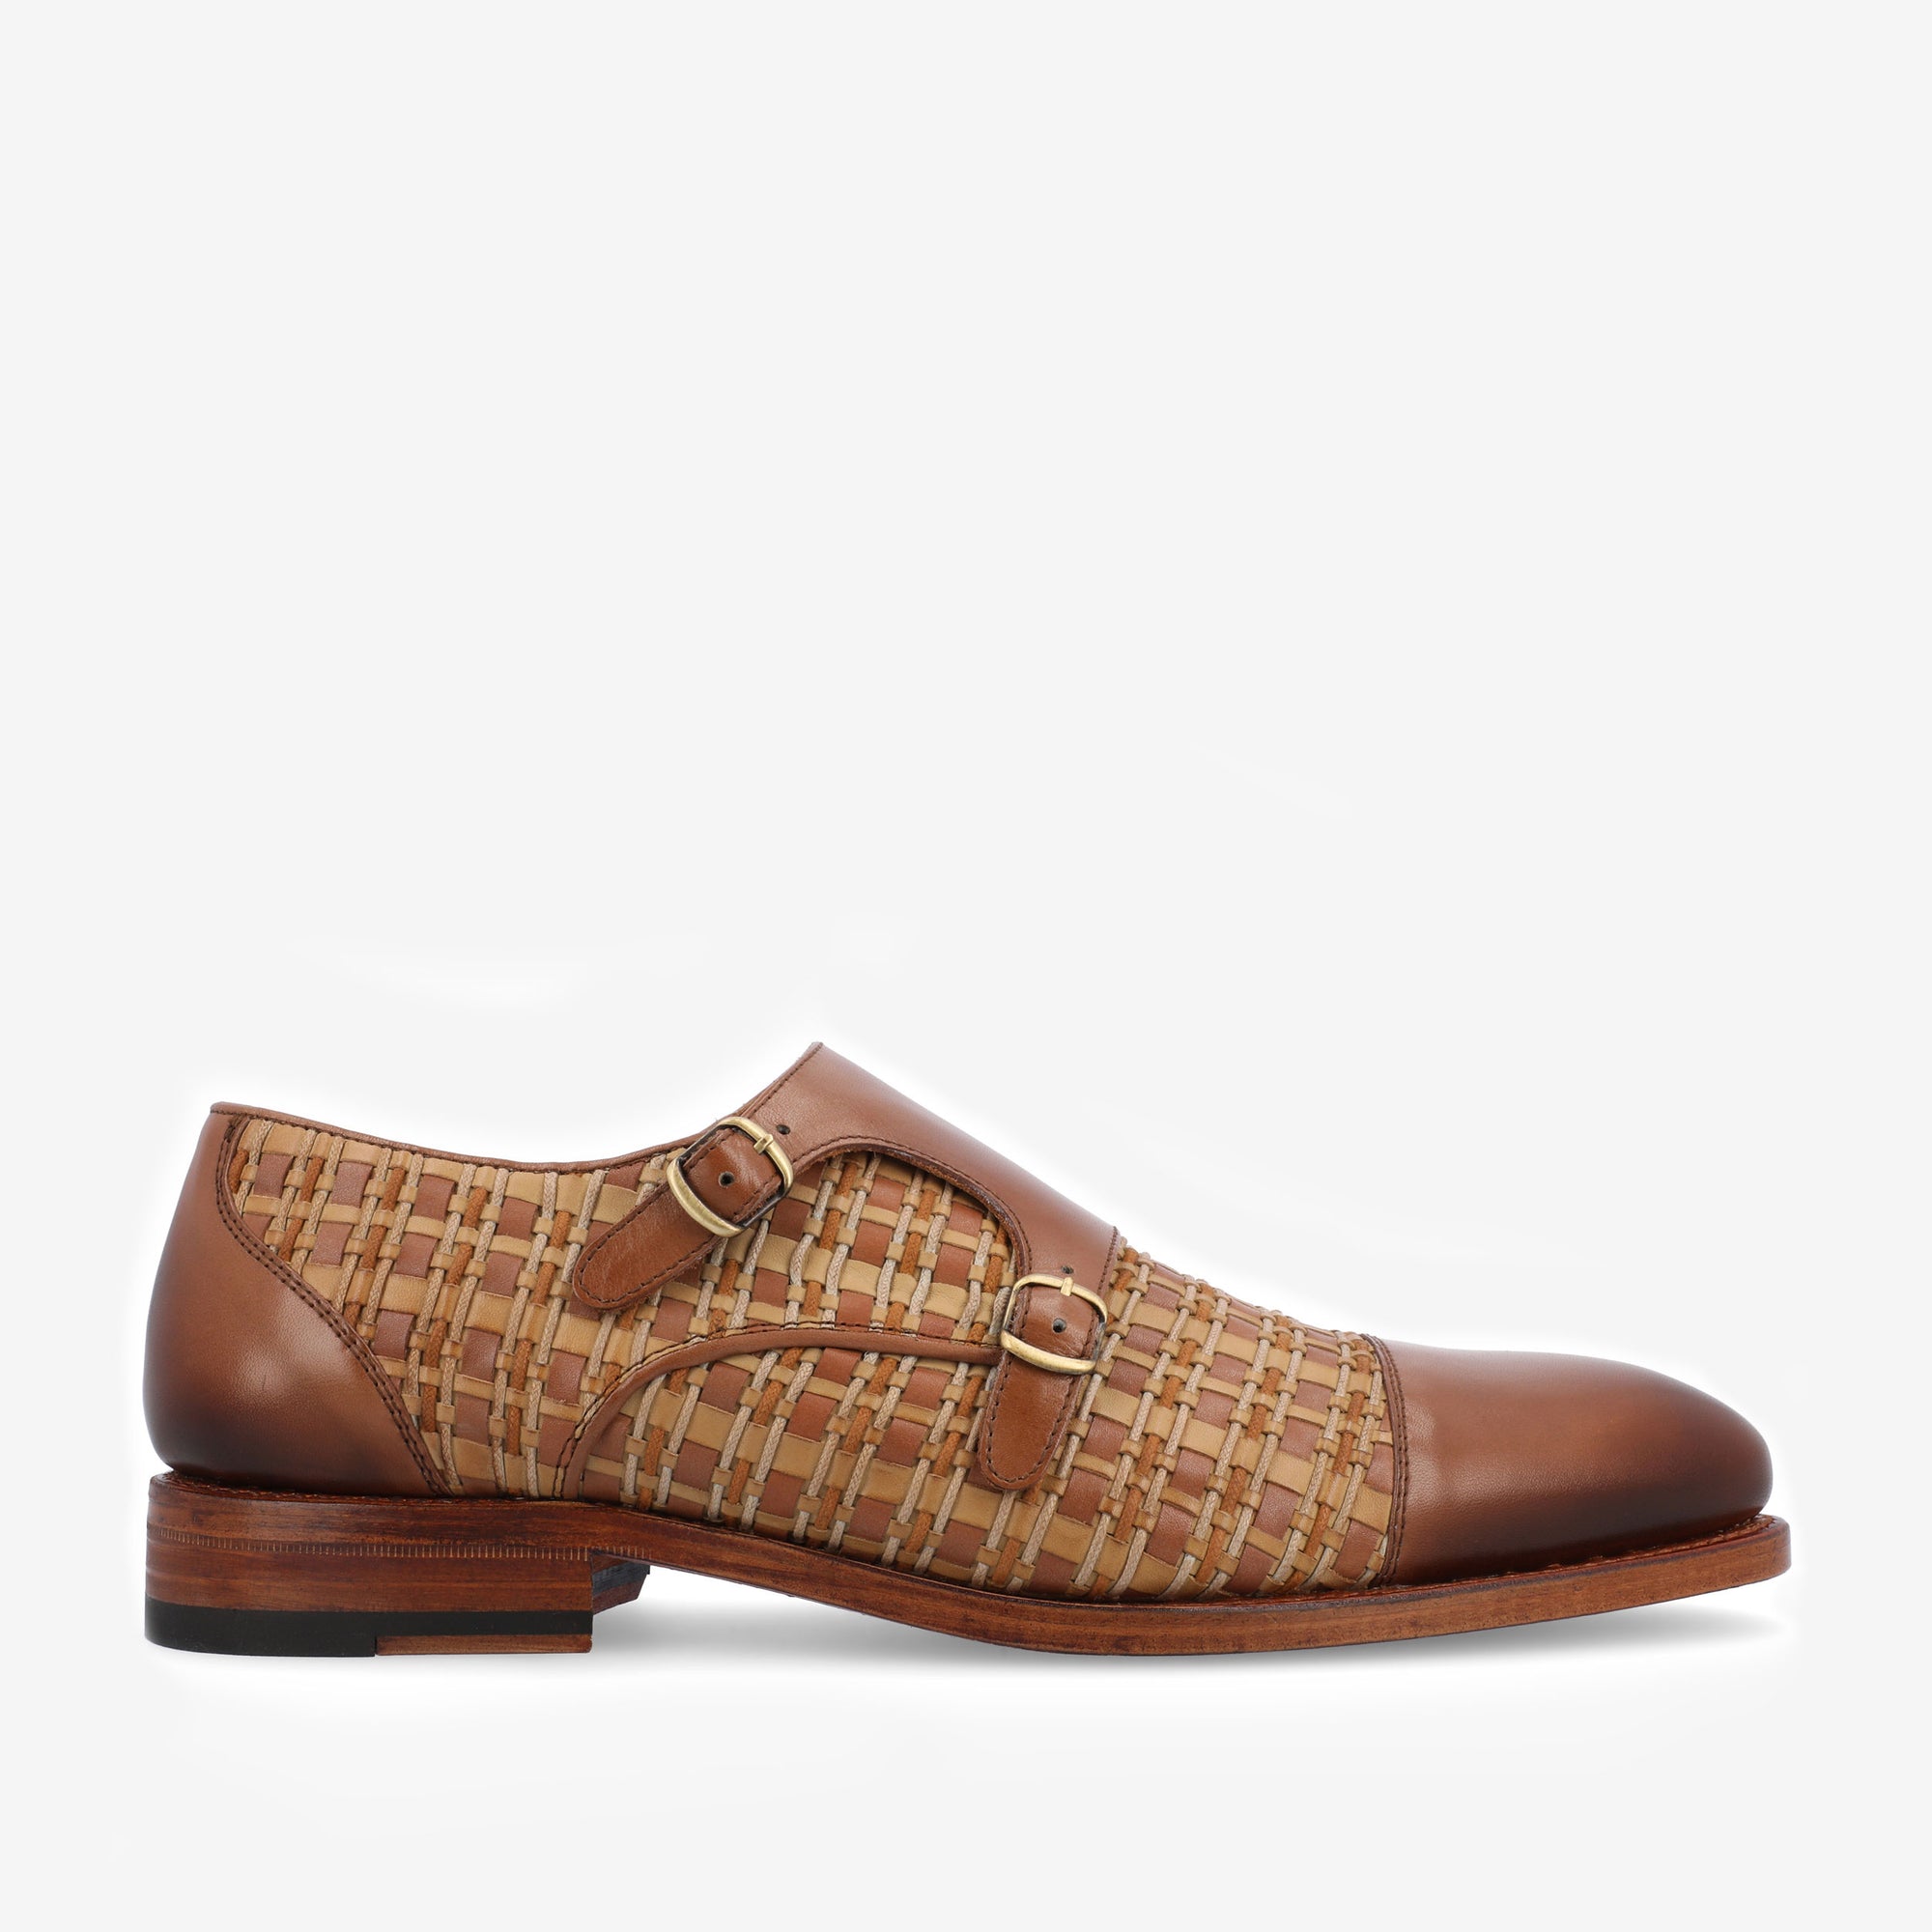 The Lucca Monk Woven in Brown